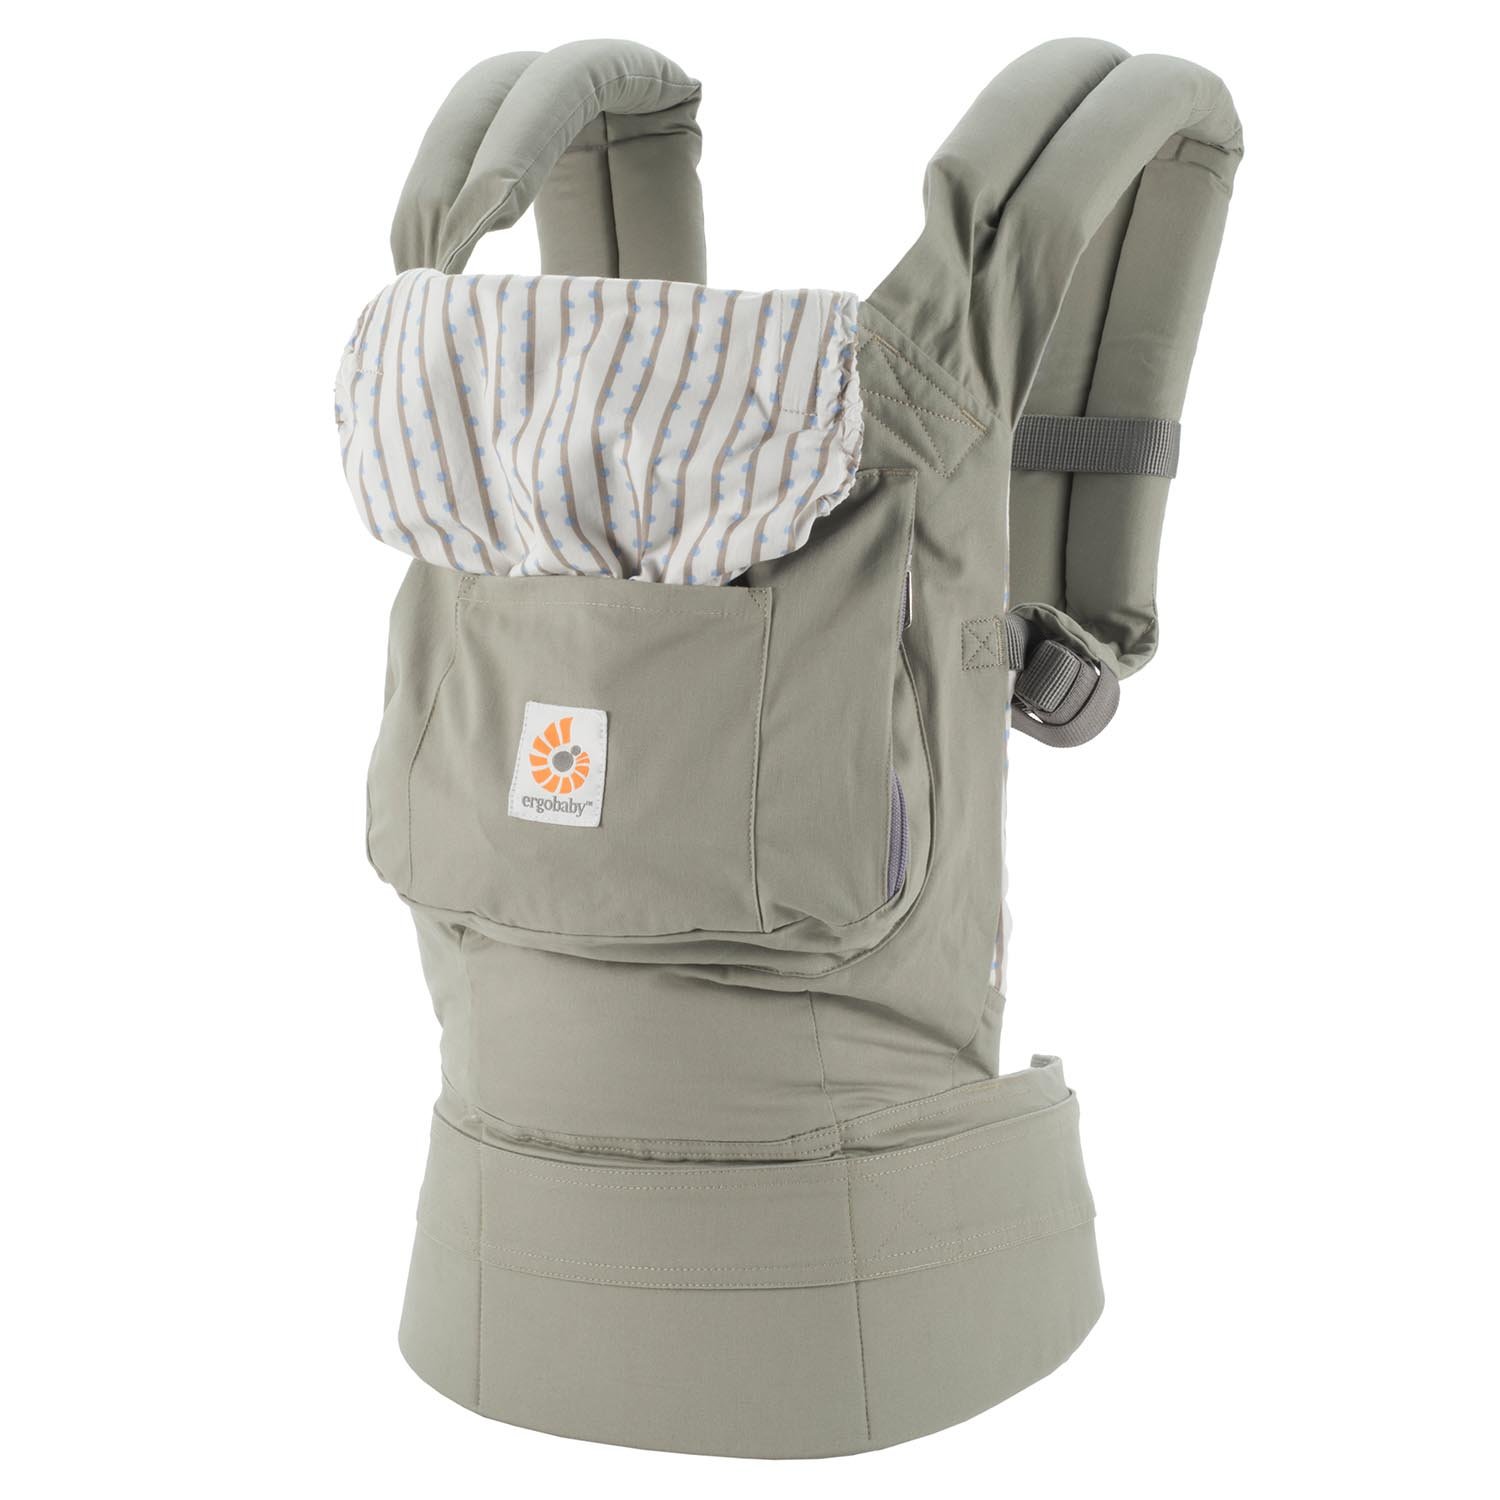 Ergobaby Baby Carrier Original Collection Ergonomic 3-Position Baby Carrier and Back Carrier